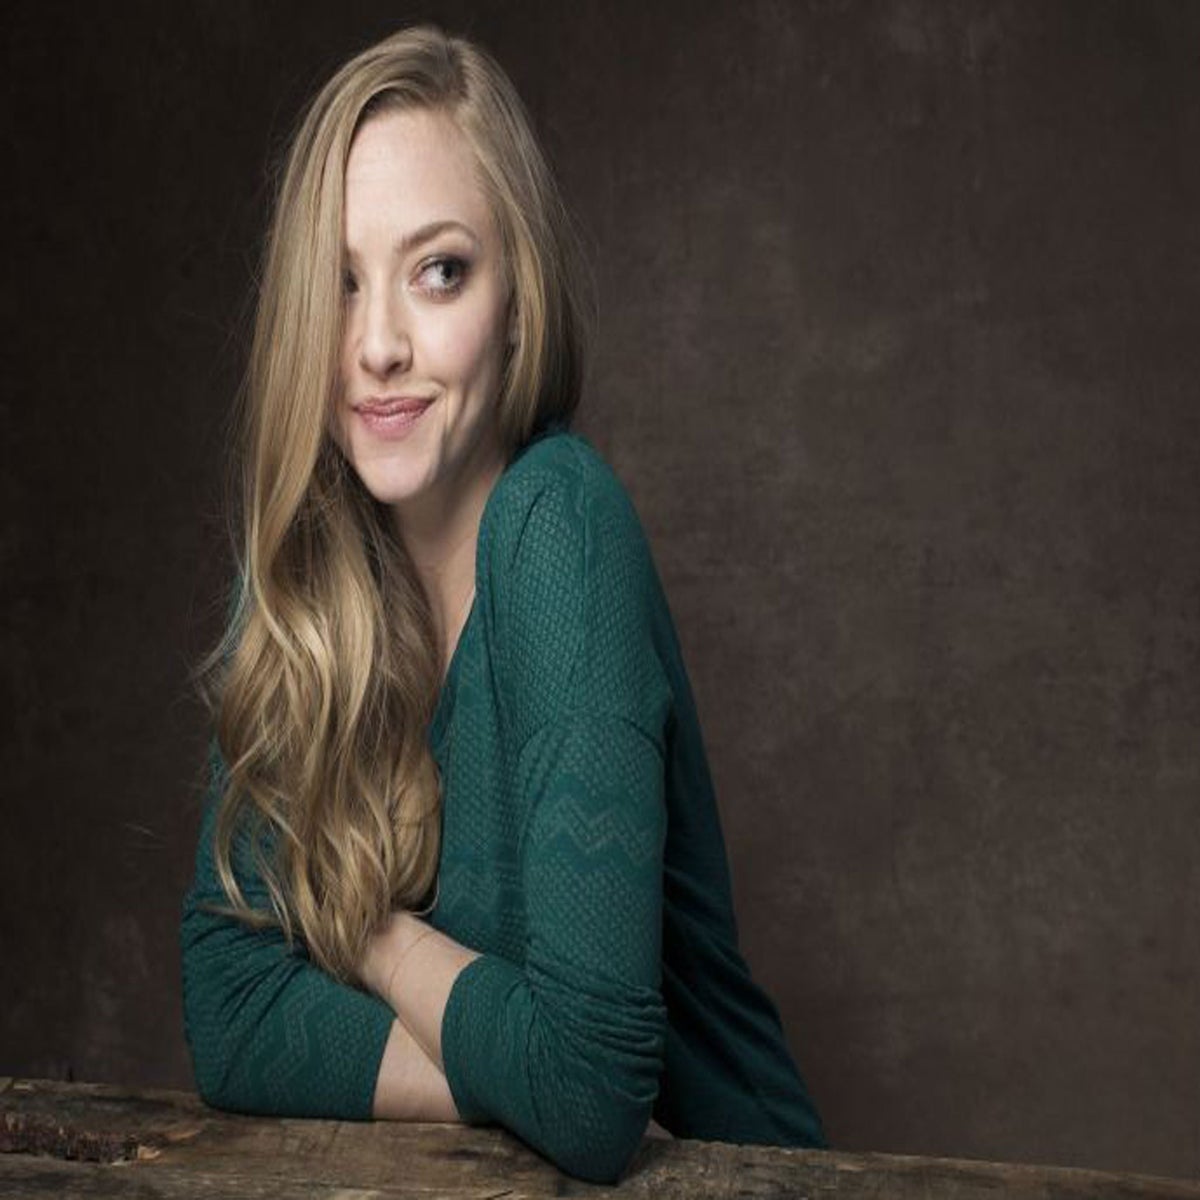 Brunette Porn Star Amanda Seyfried - Amanda Seyfried: The girl next door with a dark side | The Independent |  The Independent